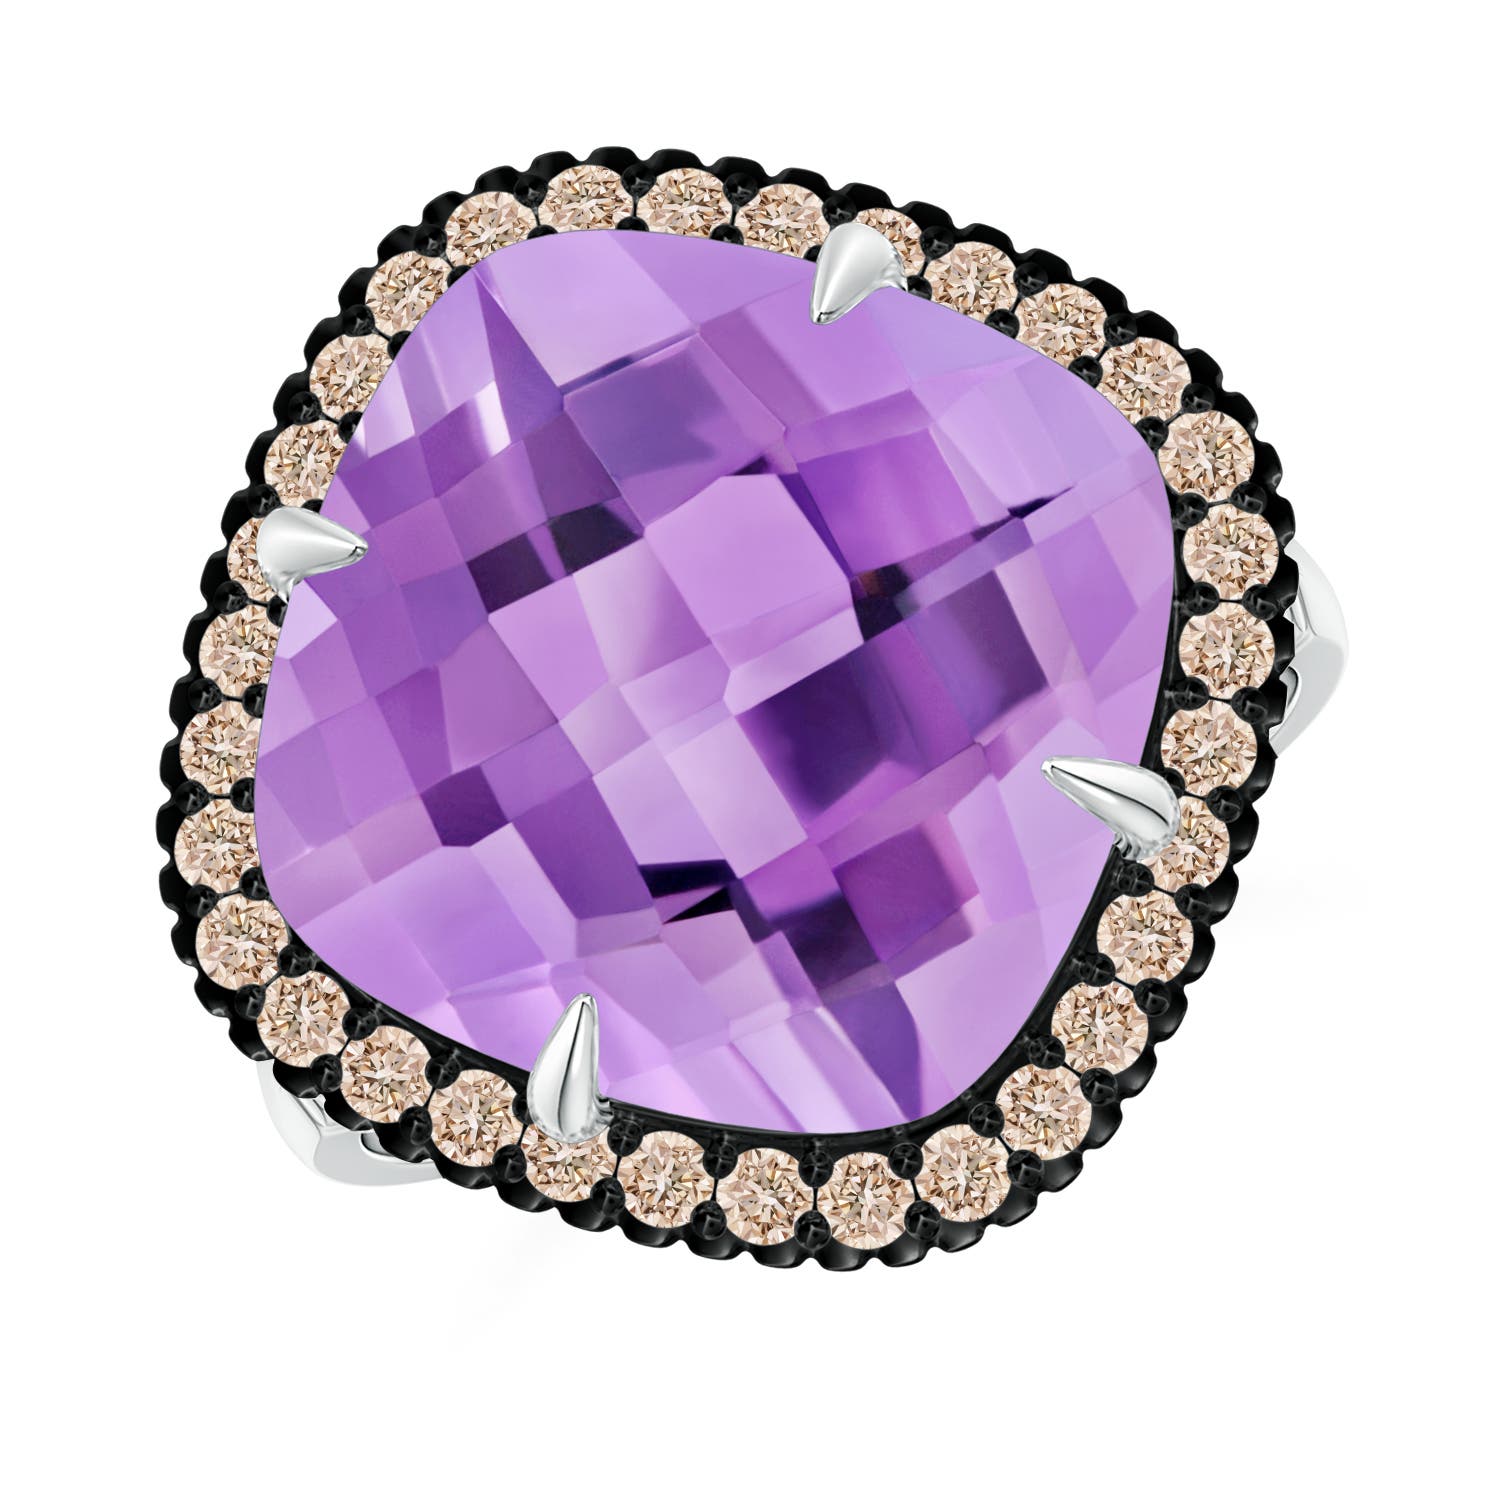 A - Amethyst / 8.38 CT / 14 KT White Gold